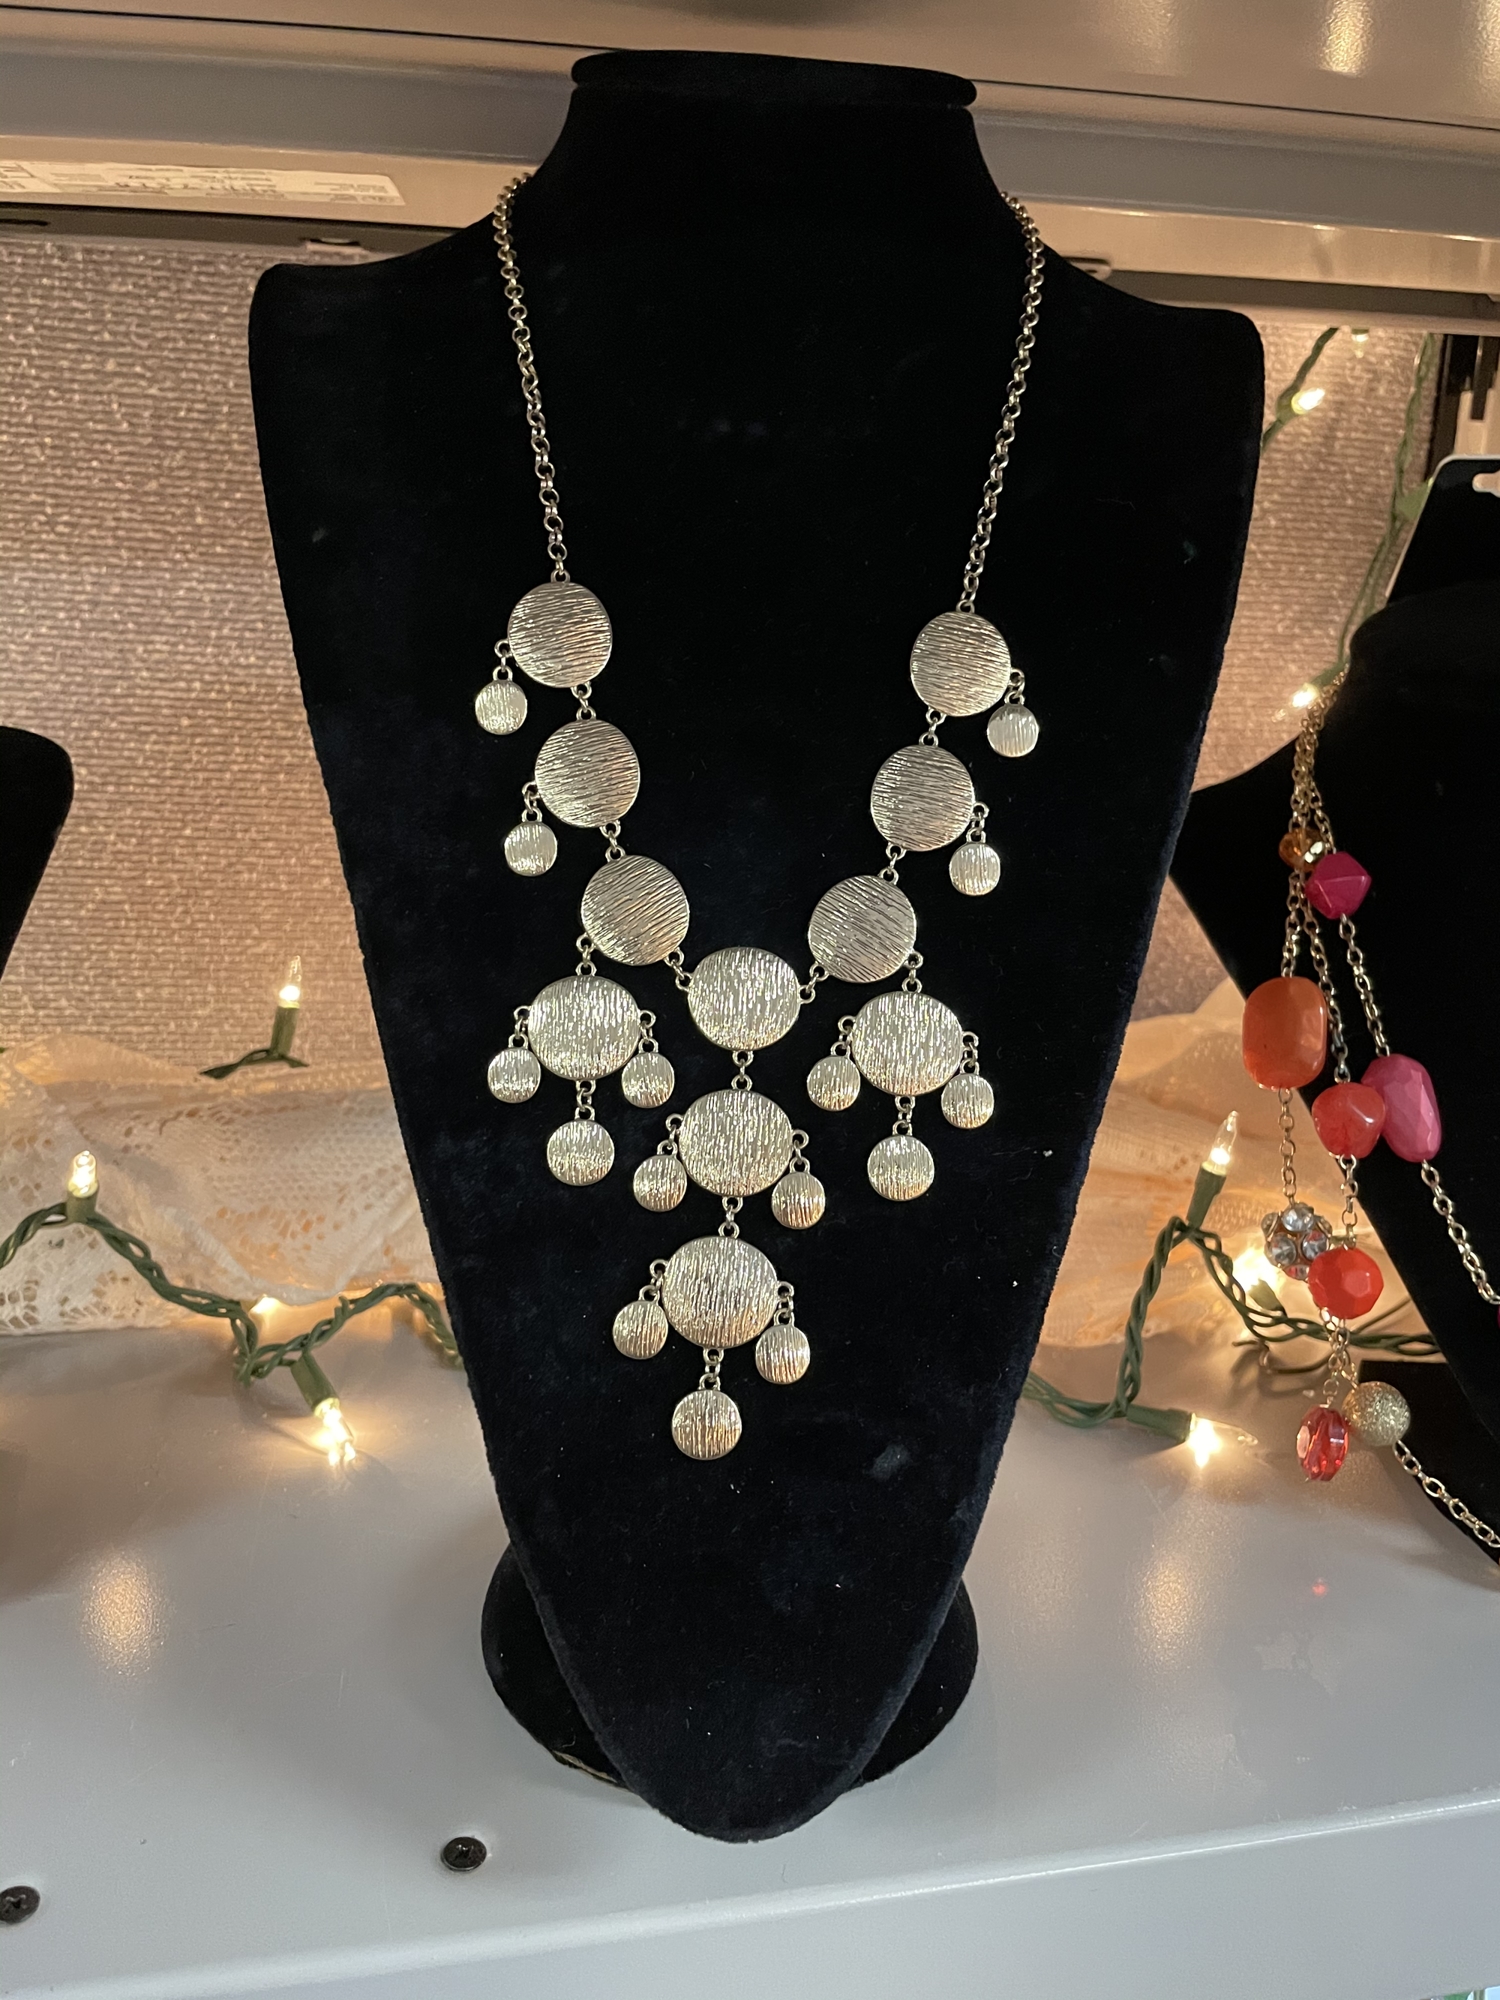 This beautiful necklace is for sale at the UMW group’s gift shop.